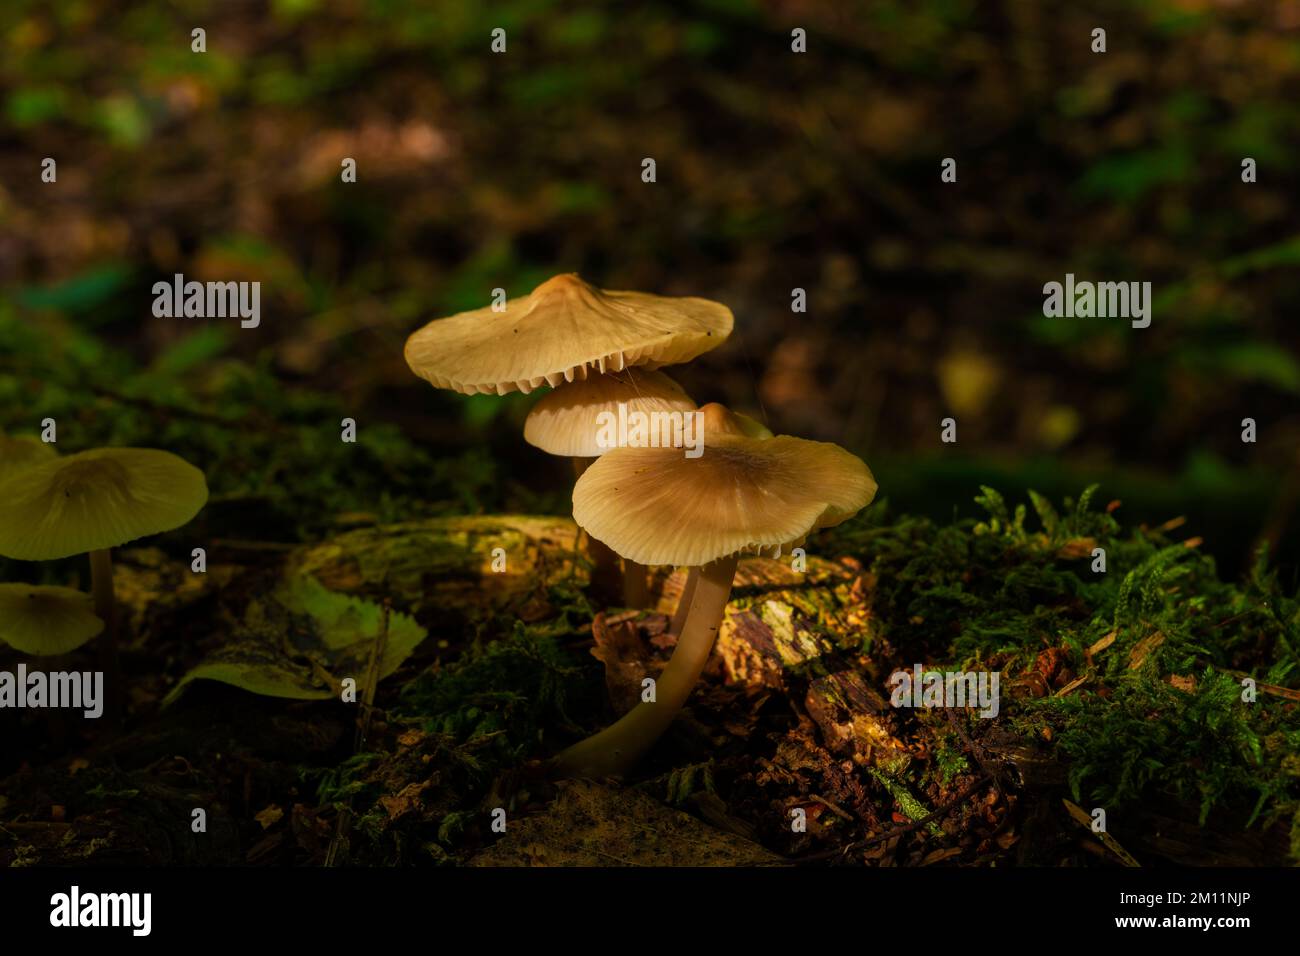 Small non-edible mushrooms illuminated by the sun in autumn in the forest Stock Photo